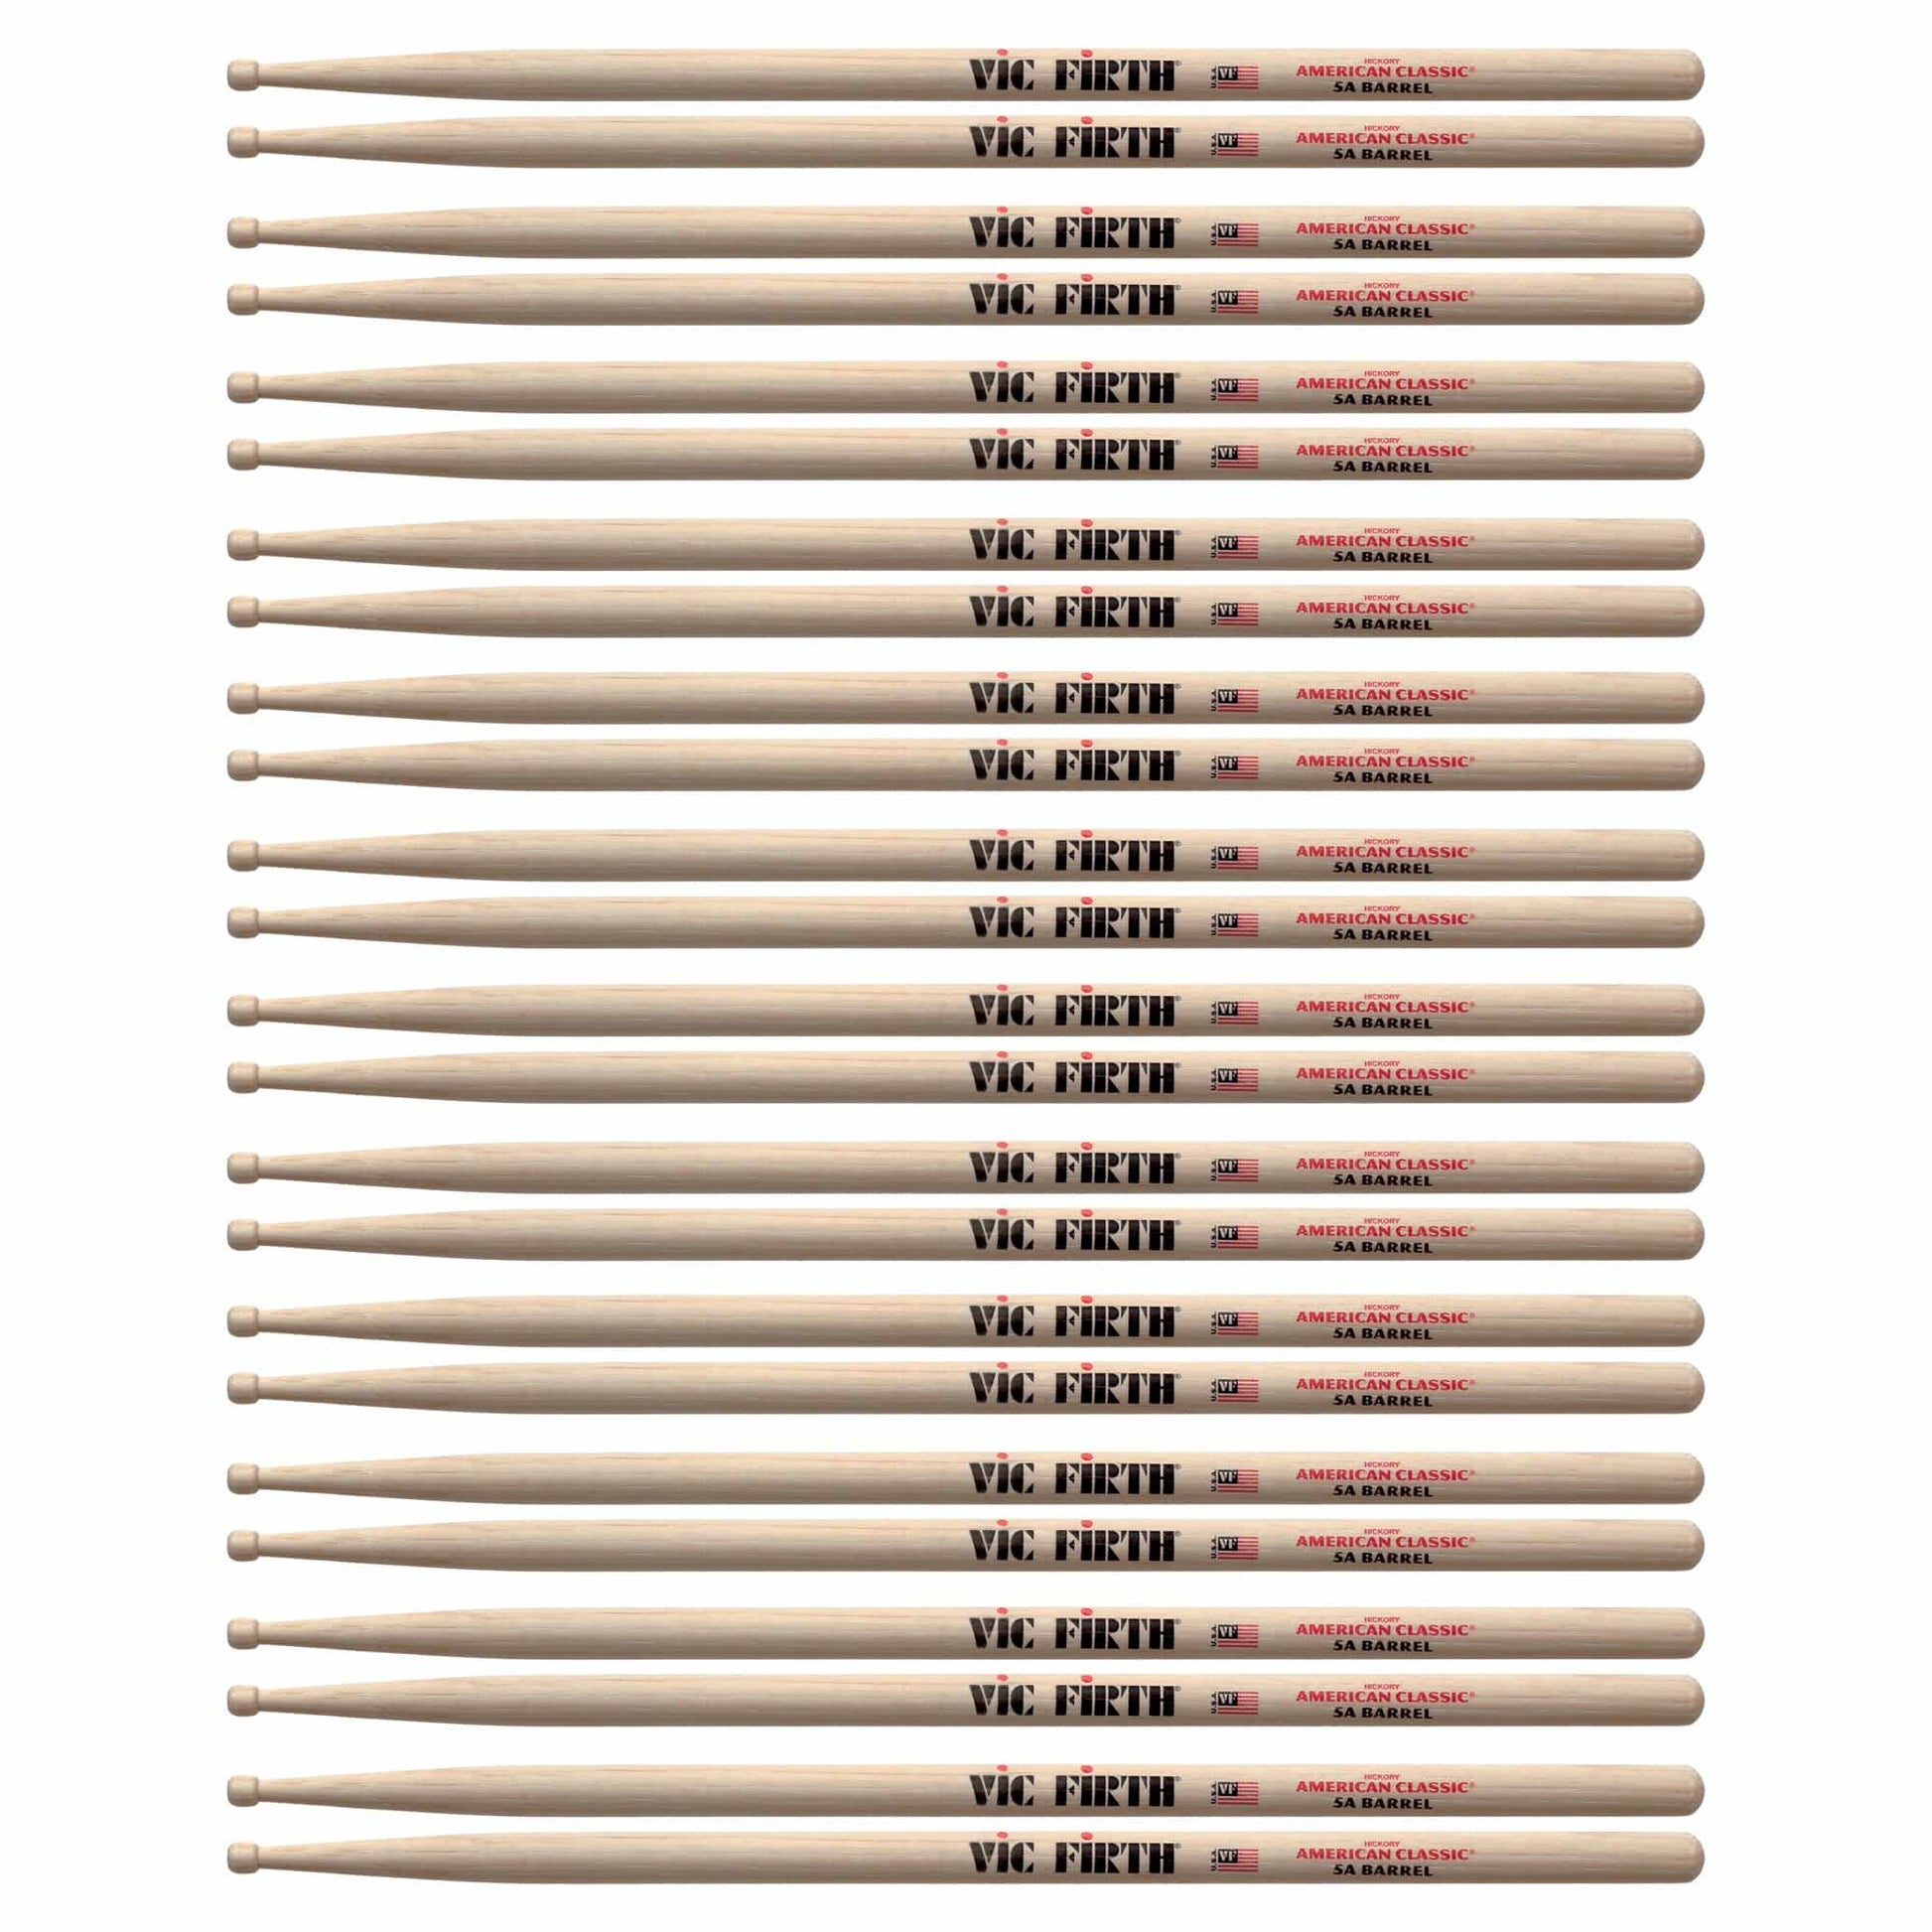 Vic Firth American Classic 5A Barrel Drum Sticks (12 Pair Bundle) Drums and Percussion / Parts and Accessories / Drum Sticks and Mallets